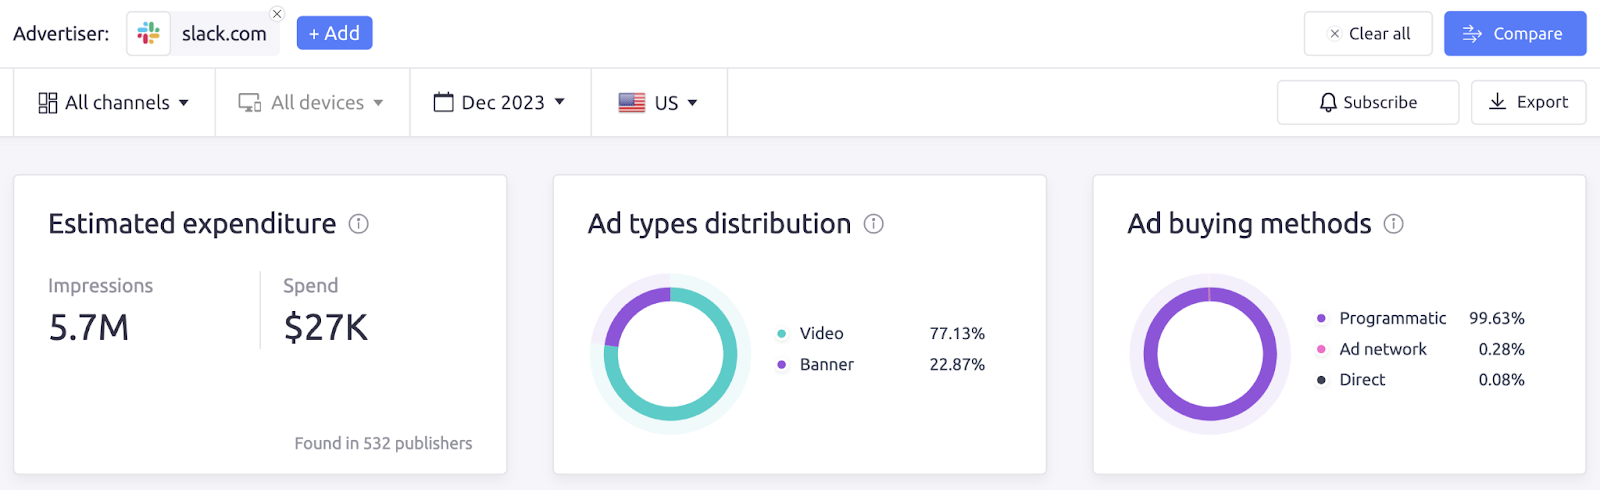 Slack’s advertising activity shown in AdClarity dashboard